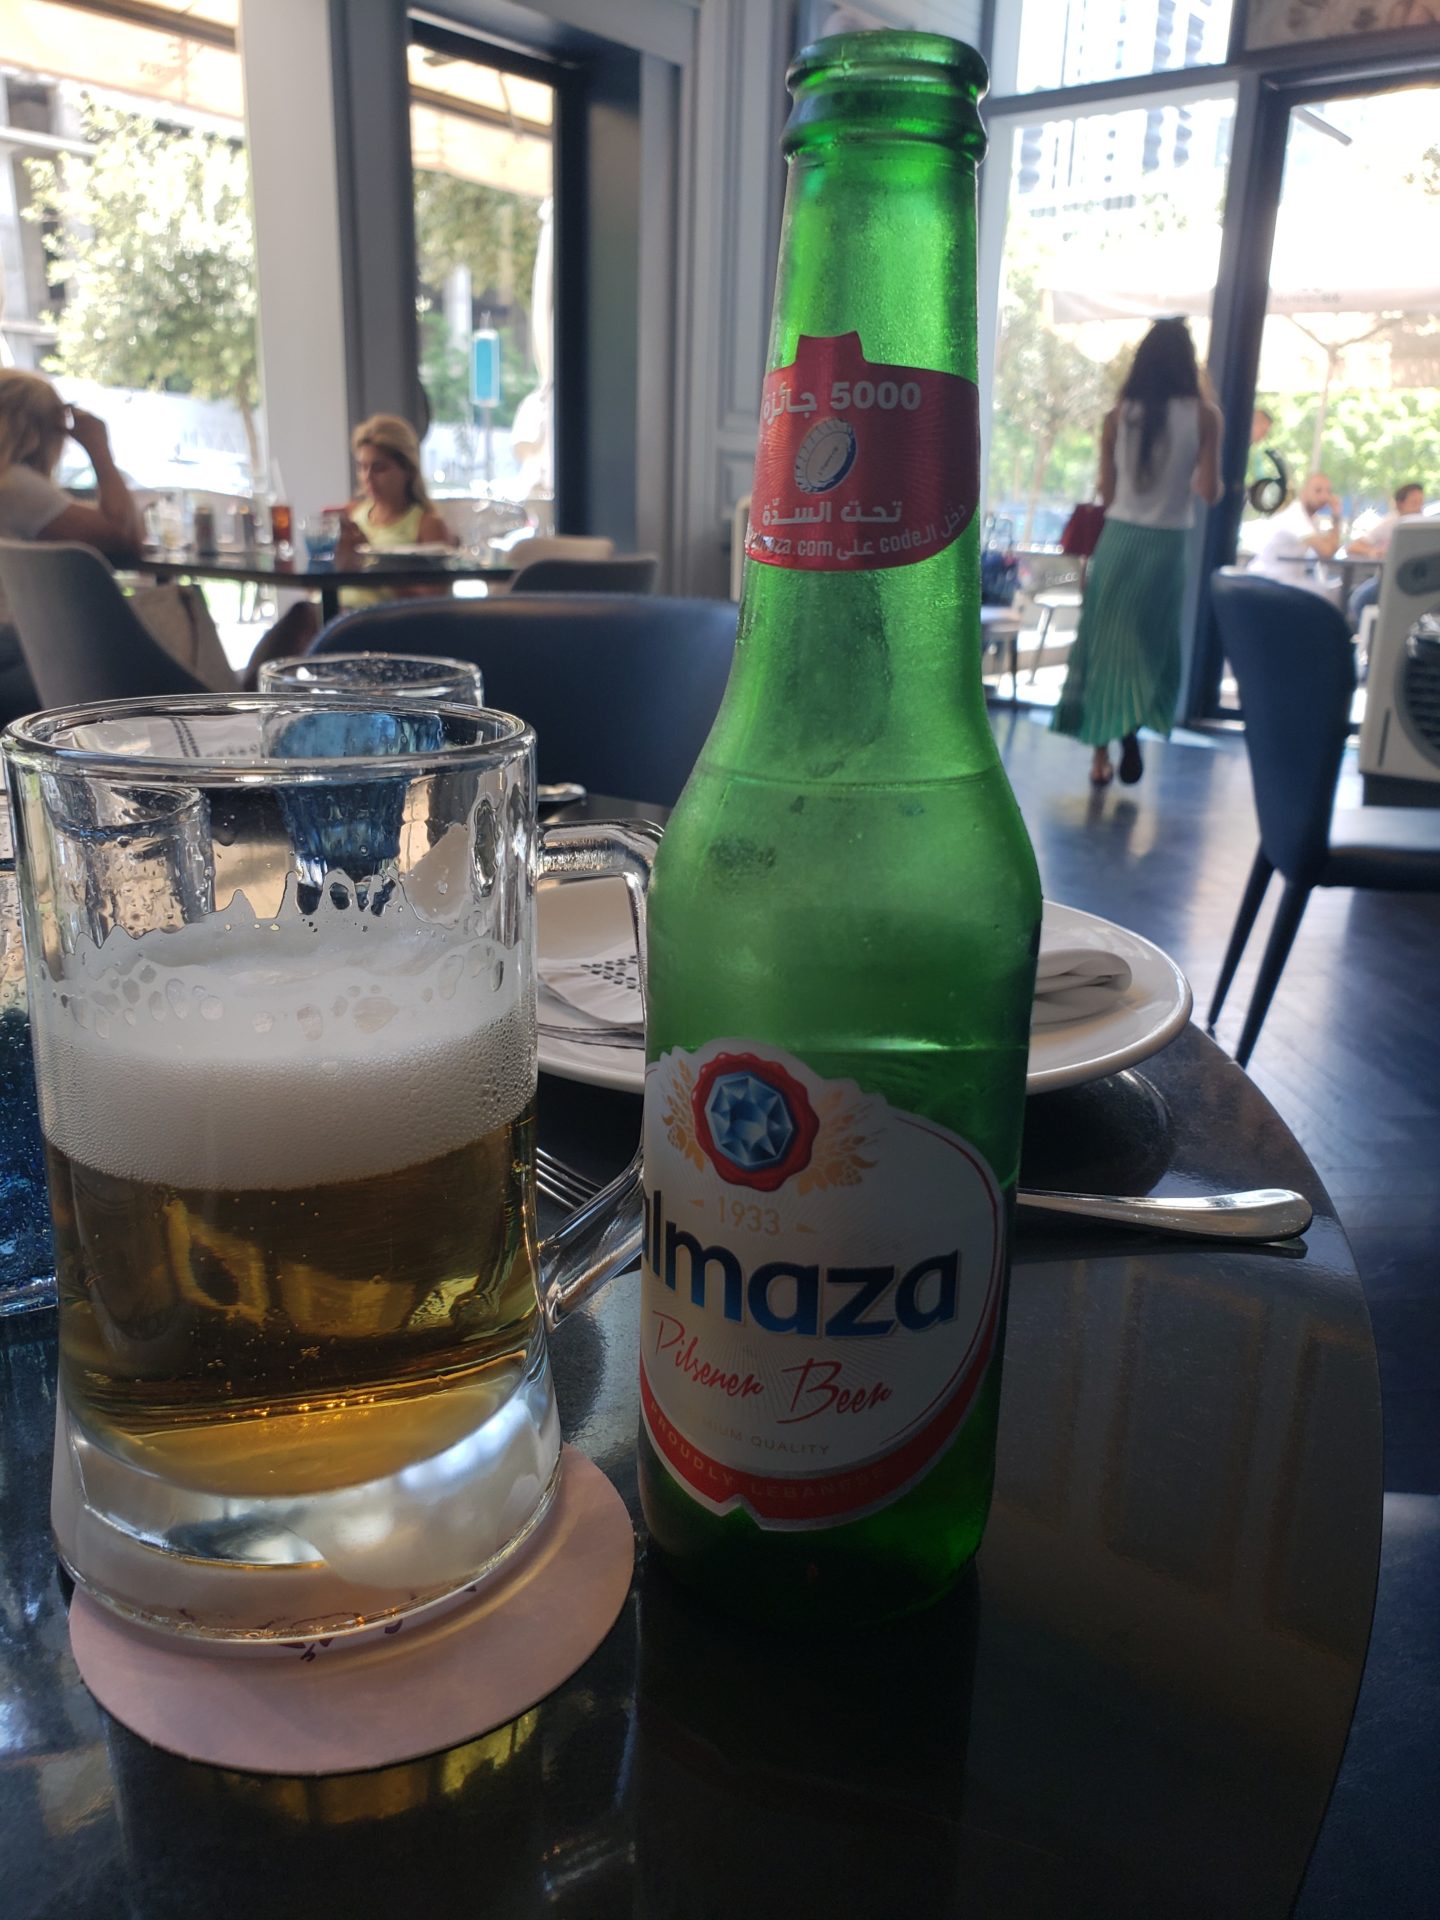 a green bottle and glass of beer on a table